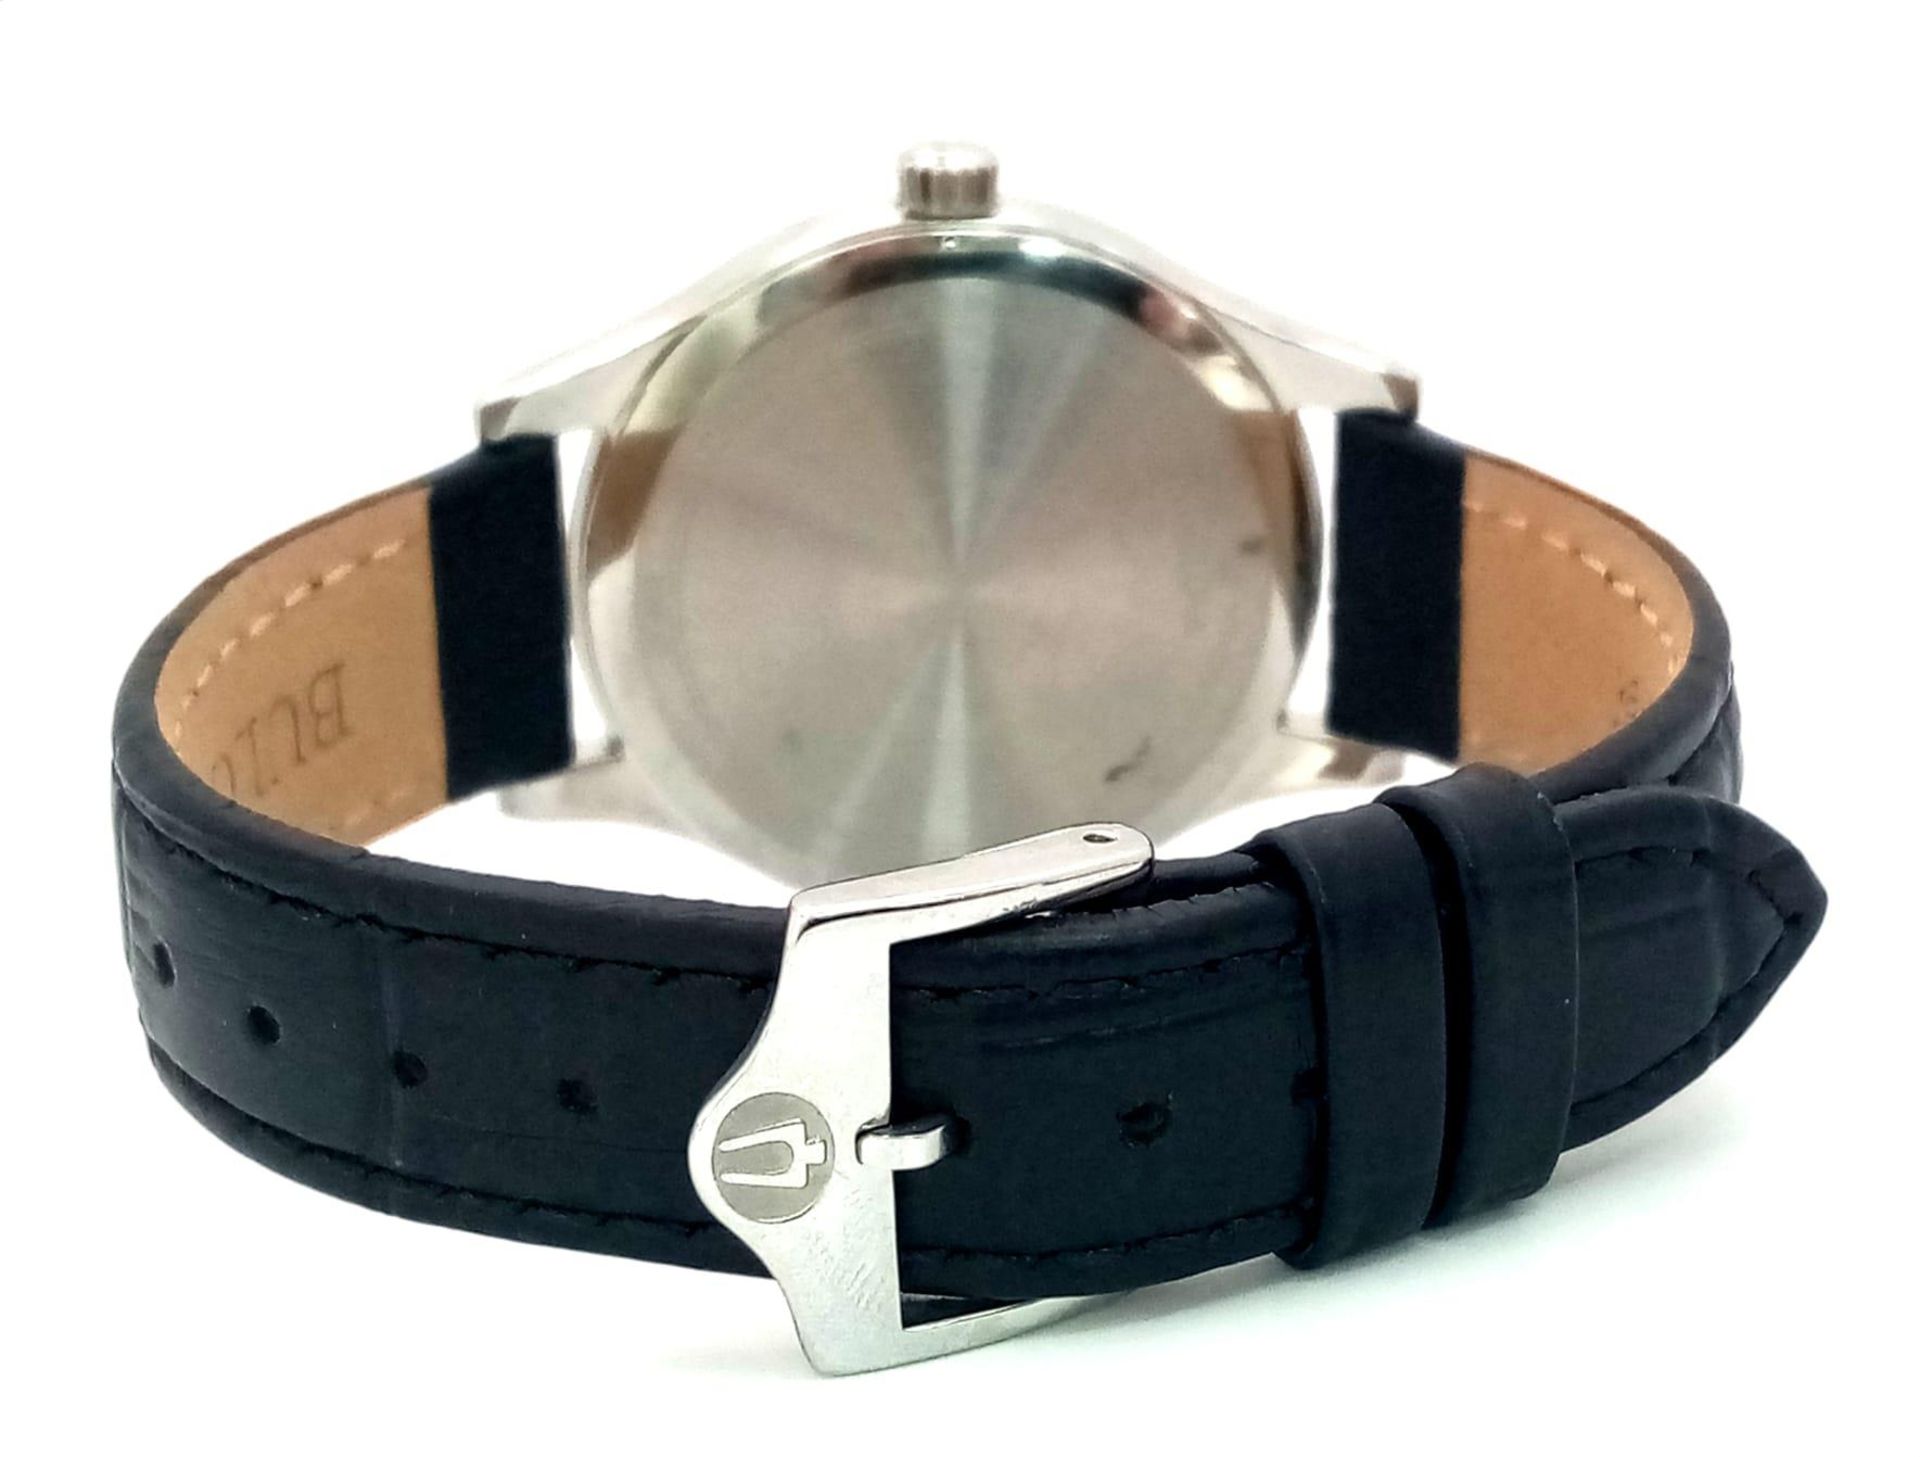 A Classic Bulova Quartz Unisex Watch. Black leather strap. Stainless steel case - 36mm. Black dial - Image 5 of 6